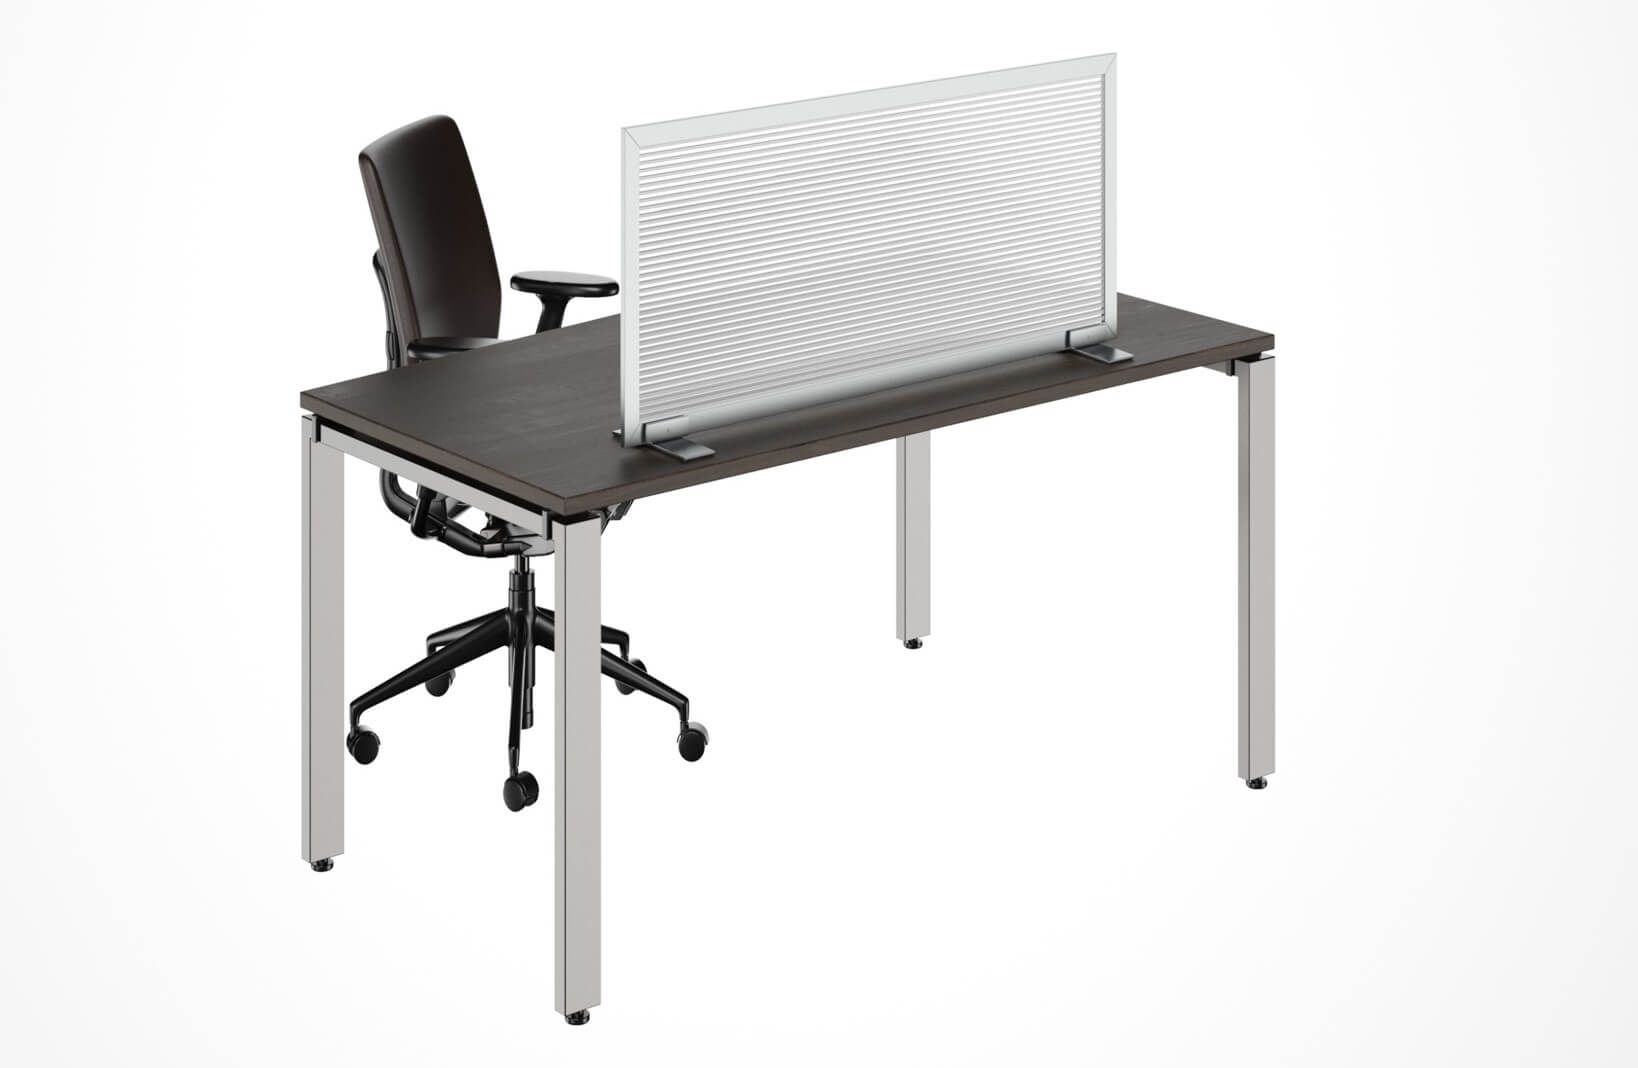 desk-dividers-free-standing-office-partitions.jpg